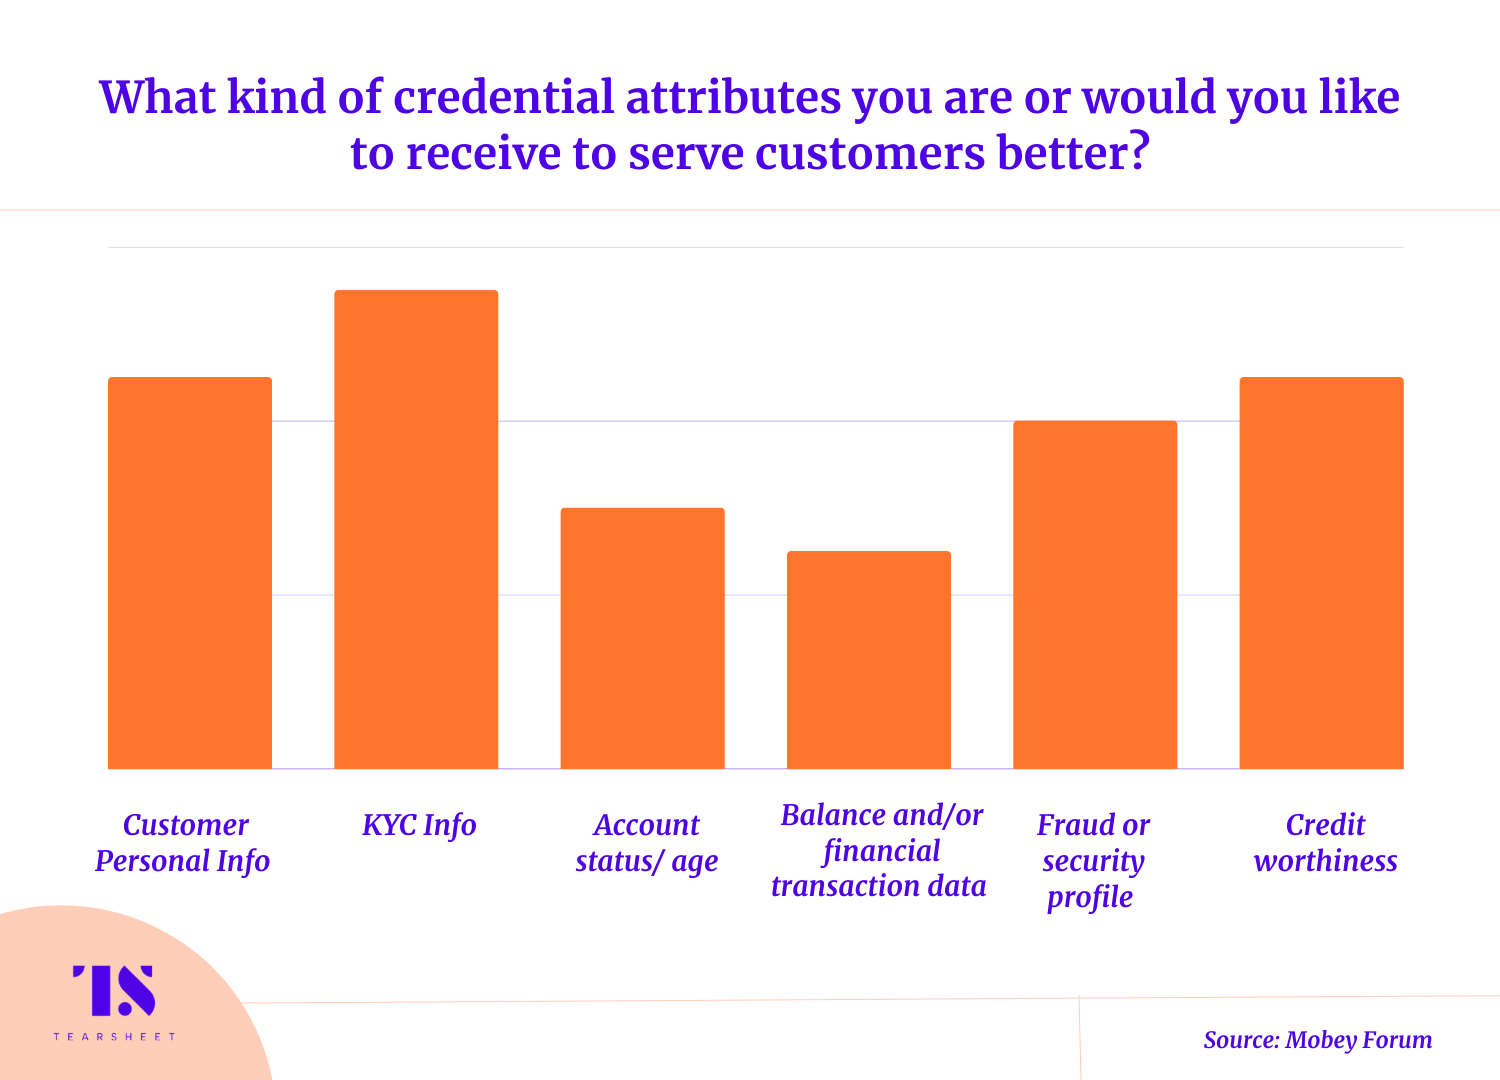 What kind of credential attributes you are or would you like to received to serve customers better?